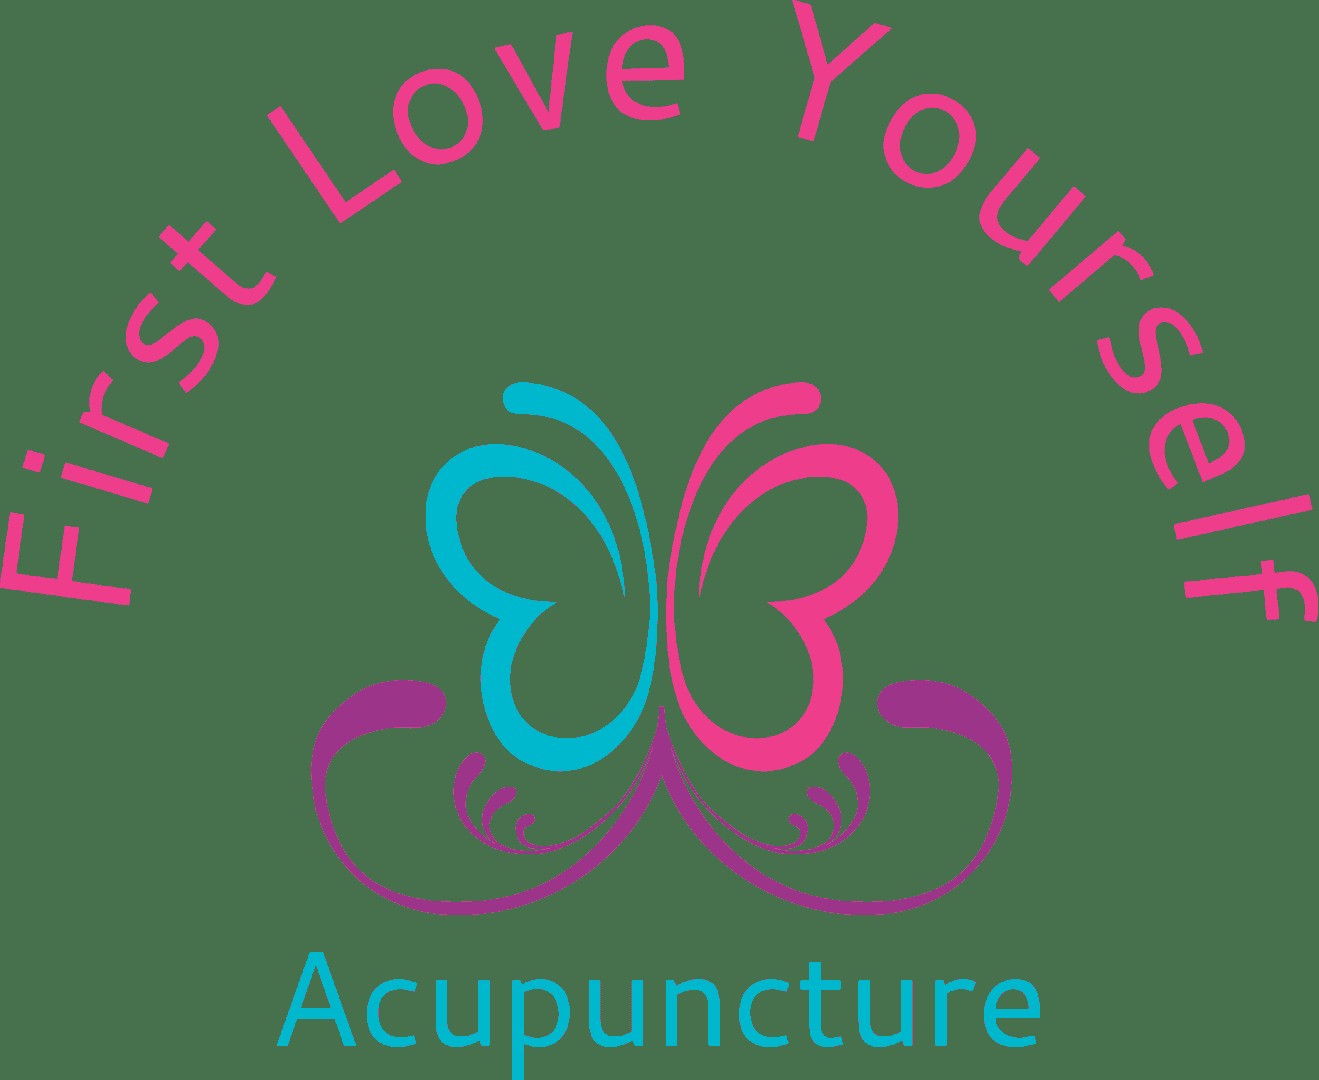 FIRST LOVE YOURSELF ACUPUNCTURE Acupuncture in Hurstpierpoint